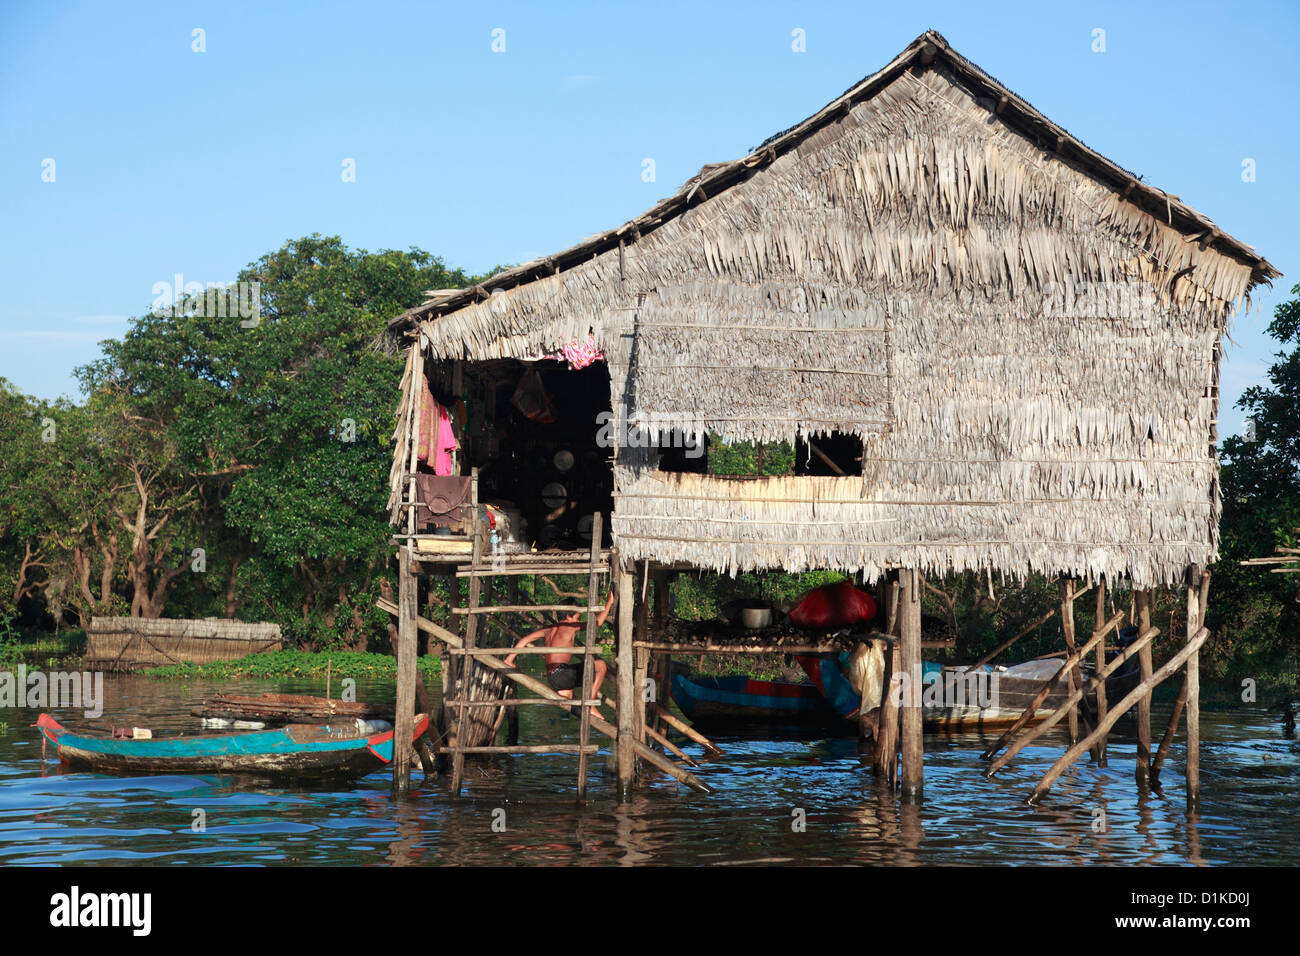 Thatched house on stilts in a river, Angkor Wat, Cambodia Stock Photo